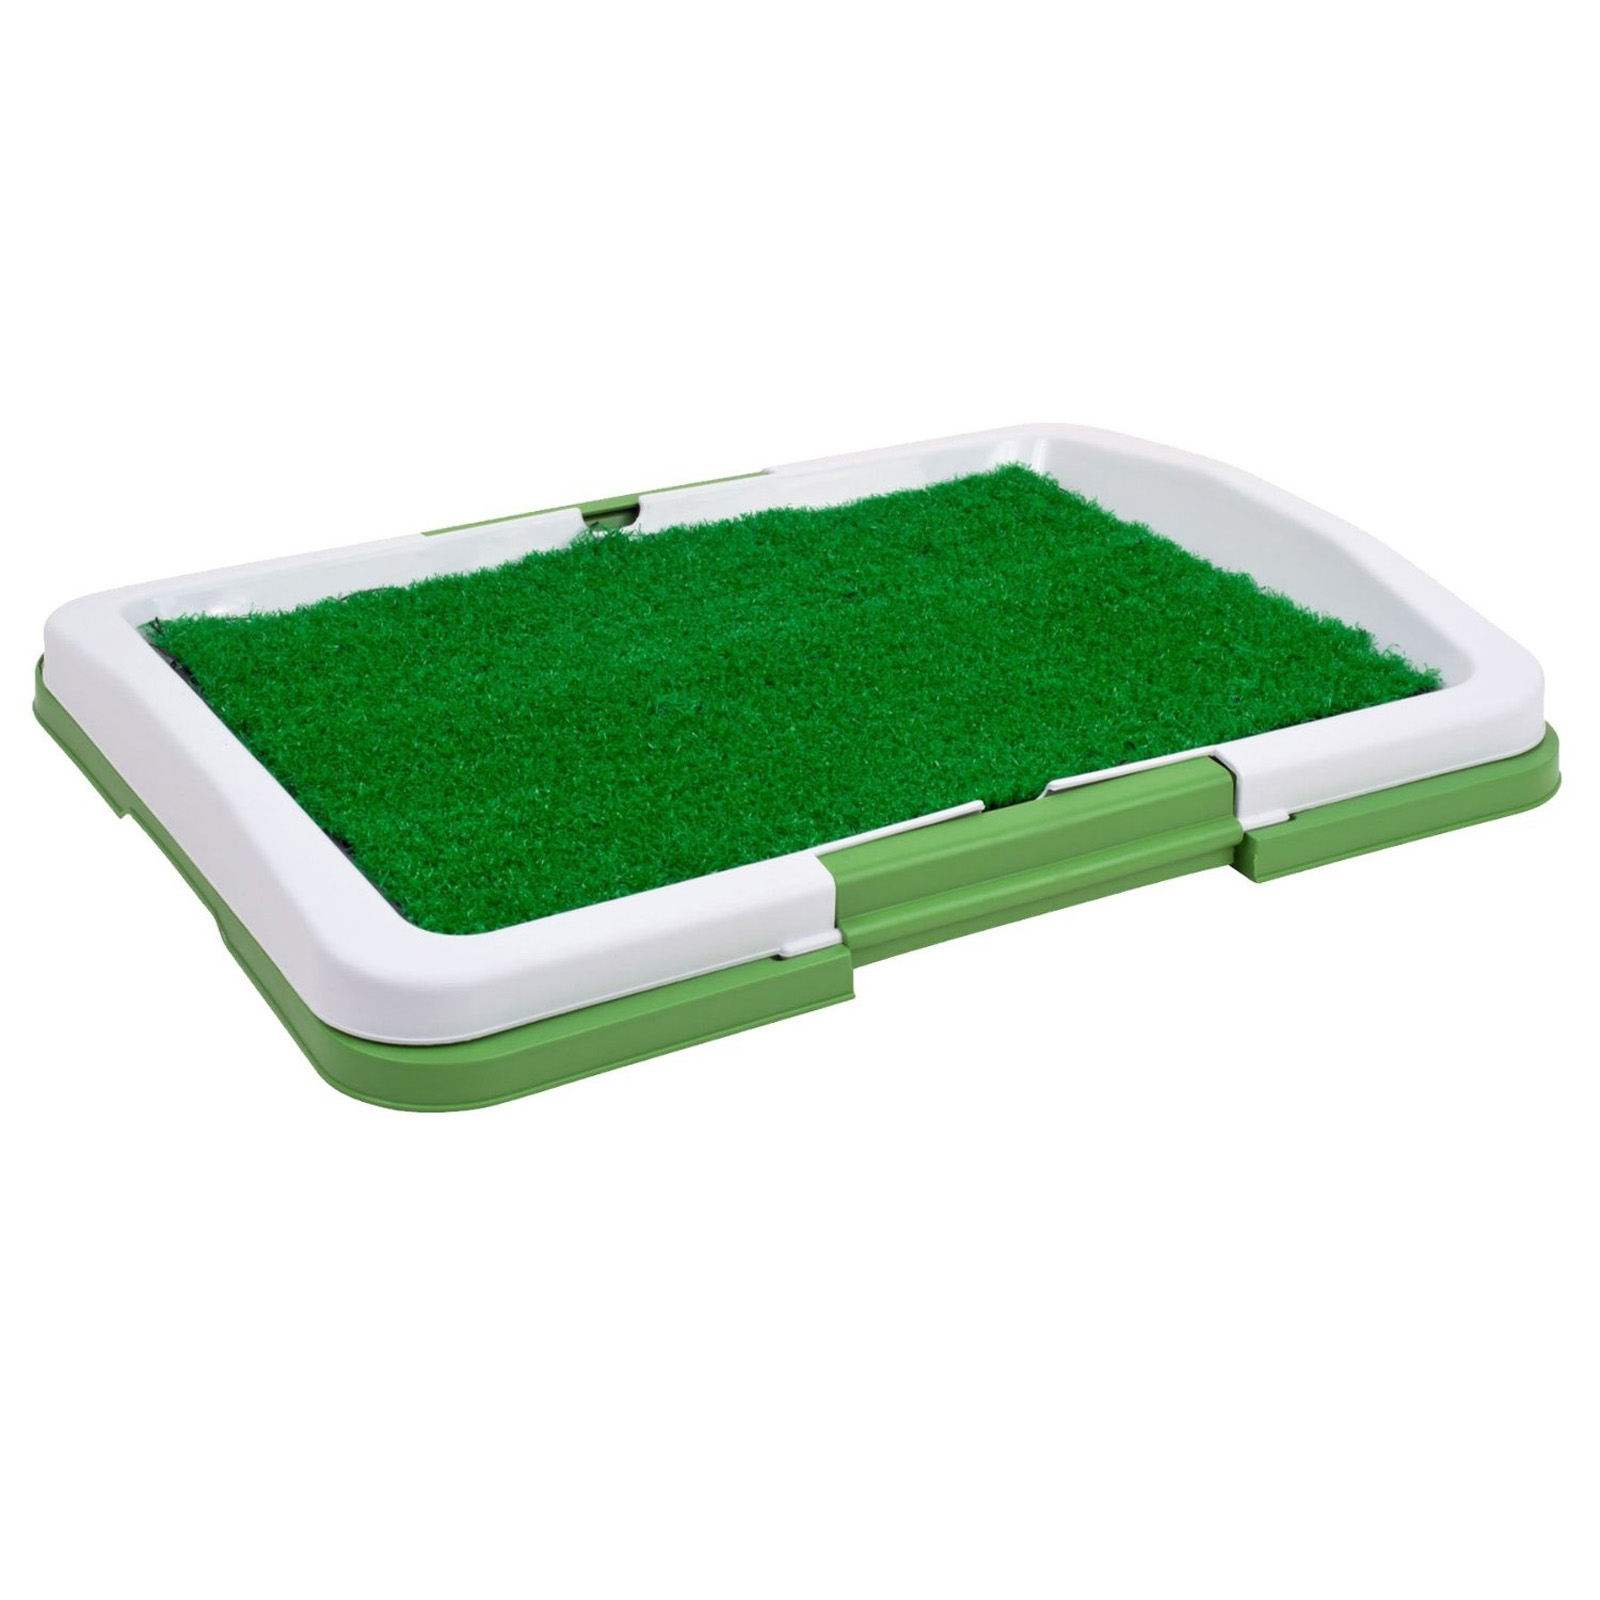 TOTAL VISION Puppy Potty Trainer Indoor Grass Training Patch - 3 Layers